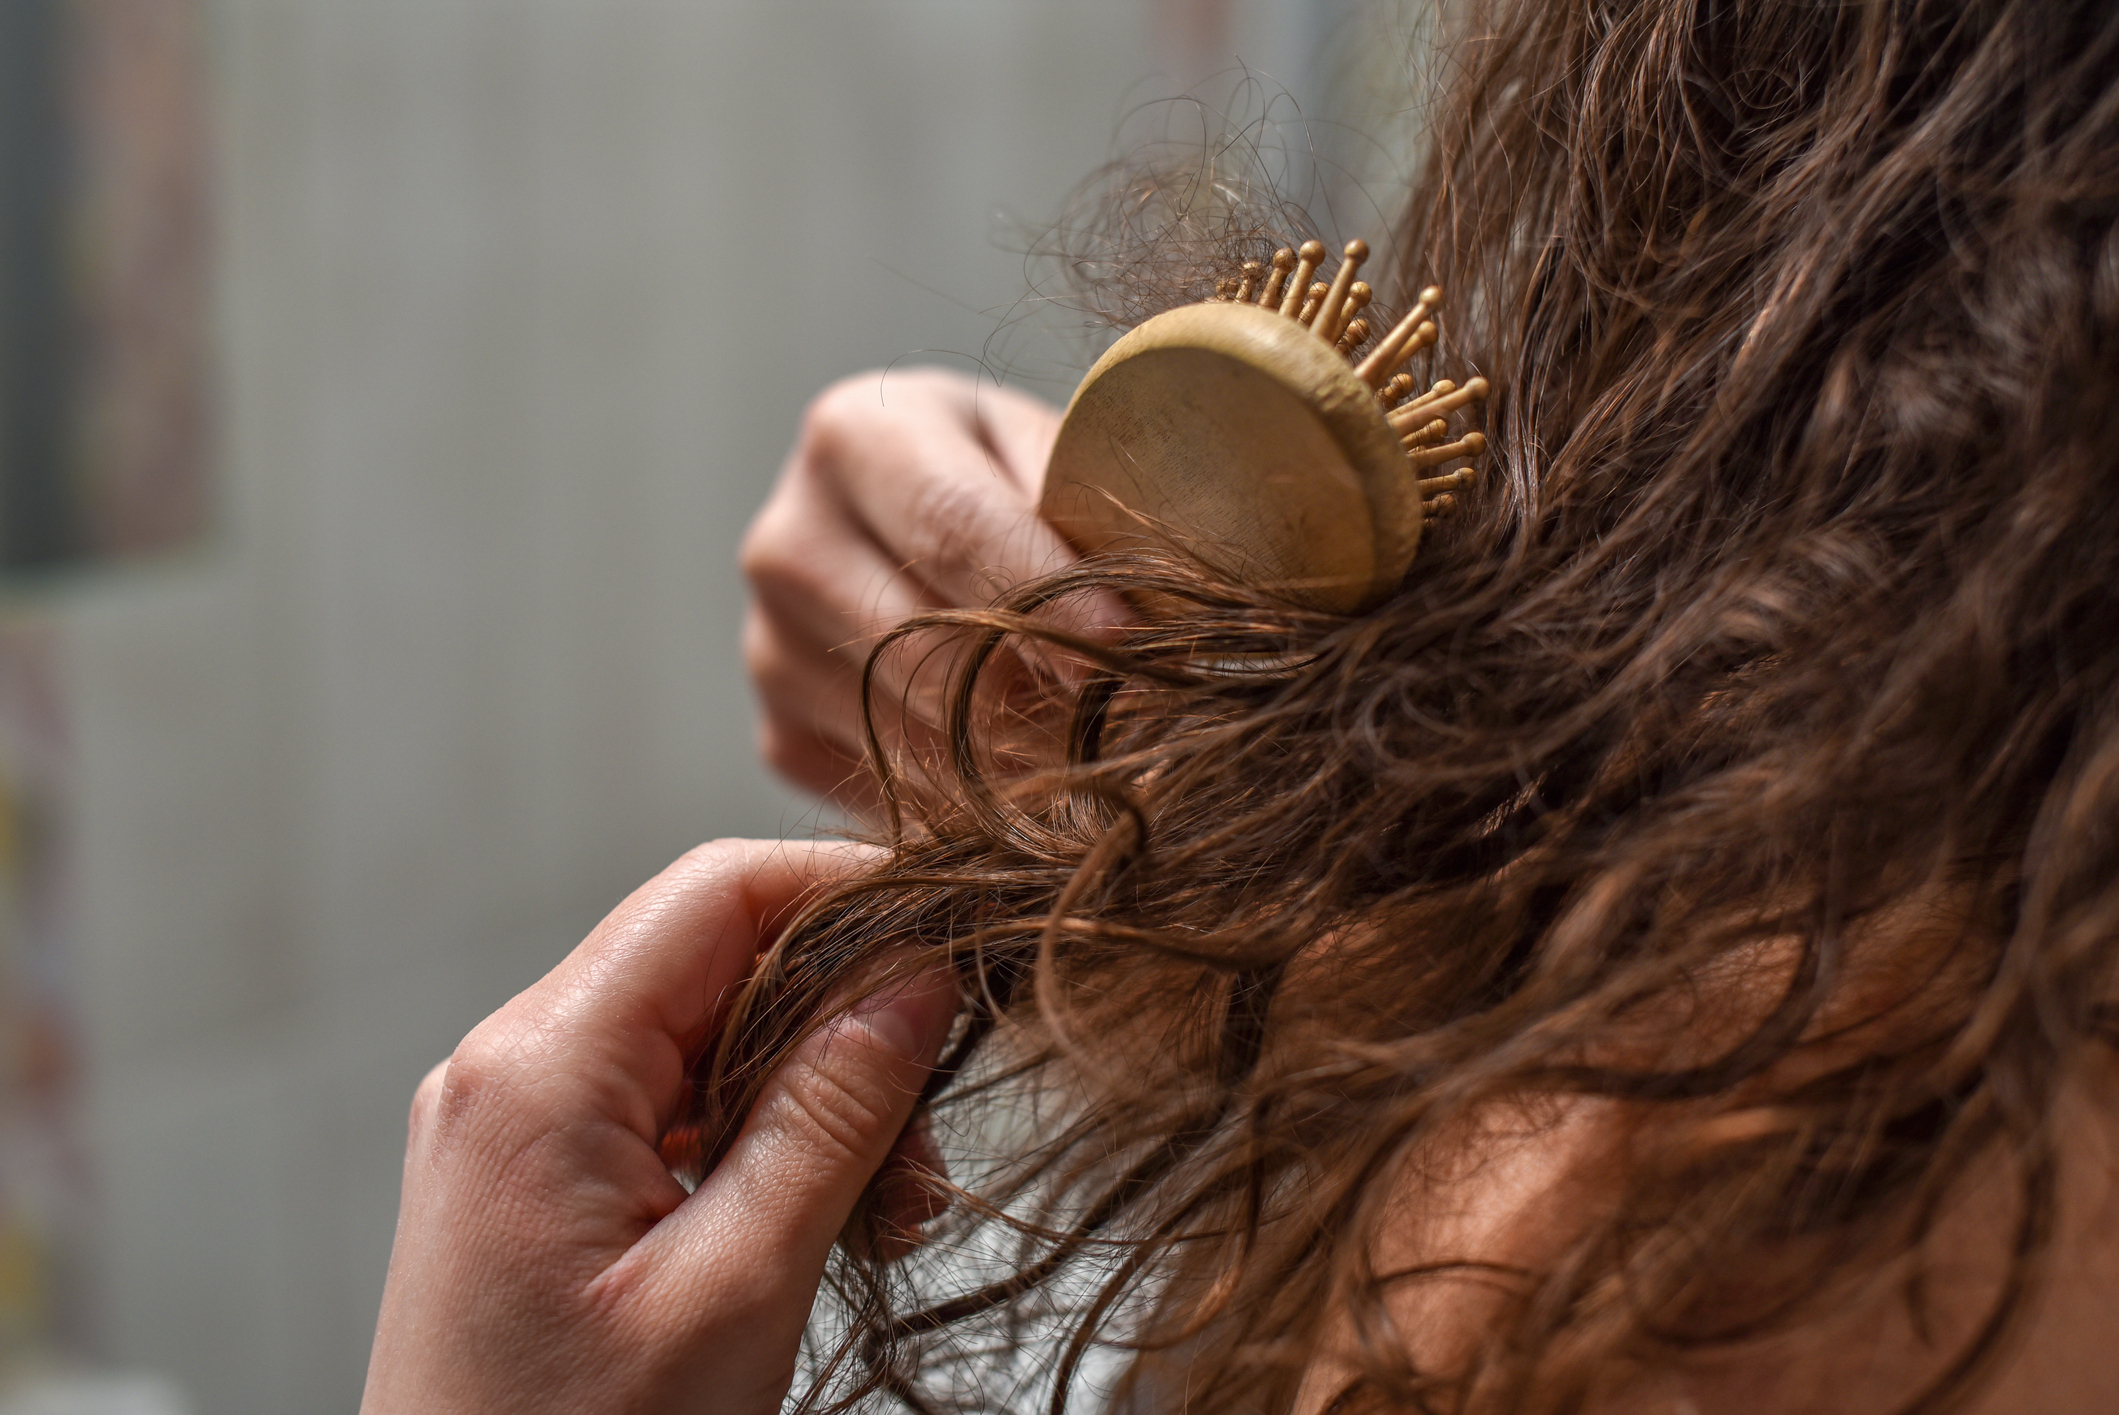 Person combing through curly hair with a round brush